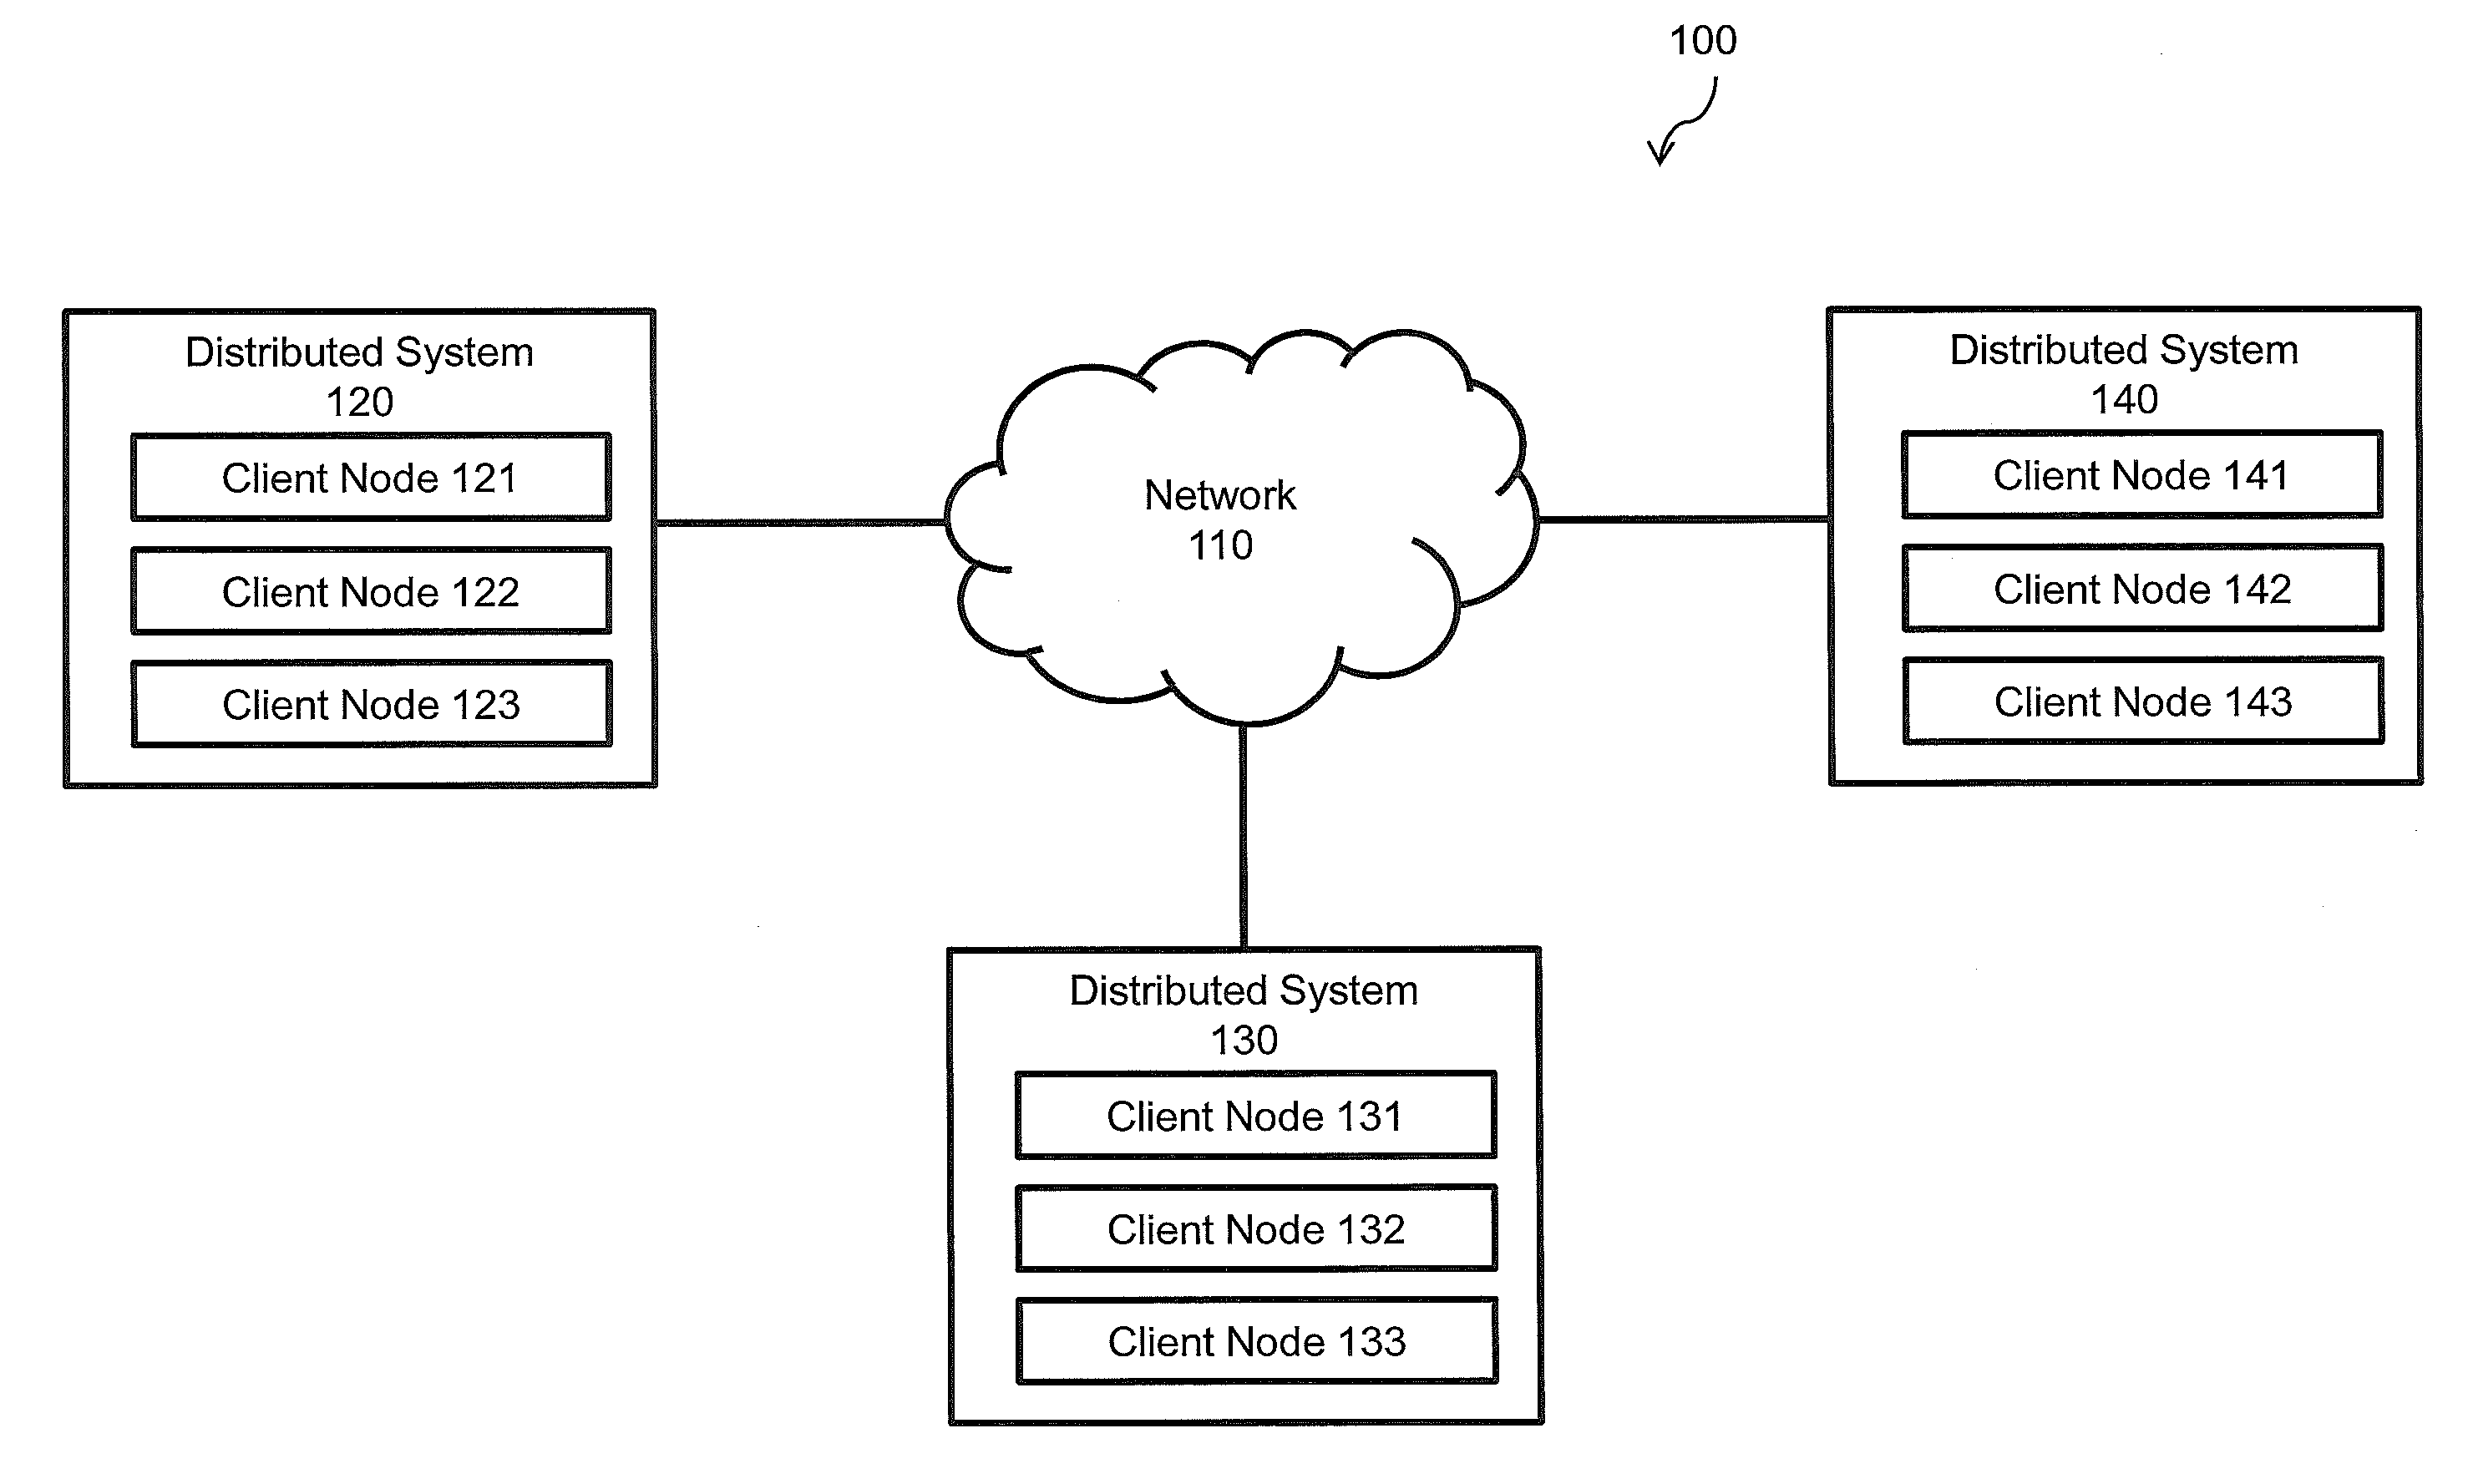 Managing dependencies between operations in a distributed system